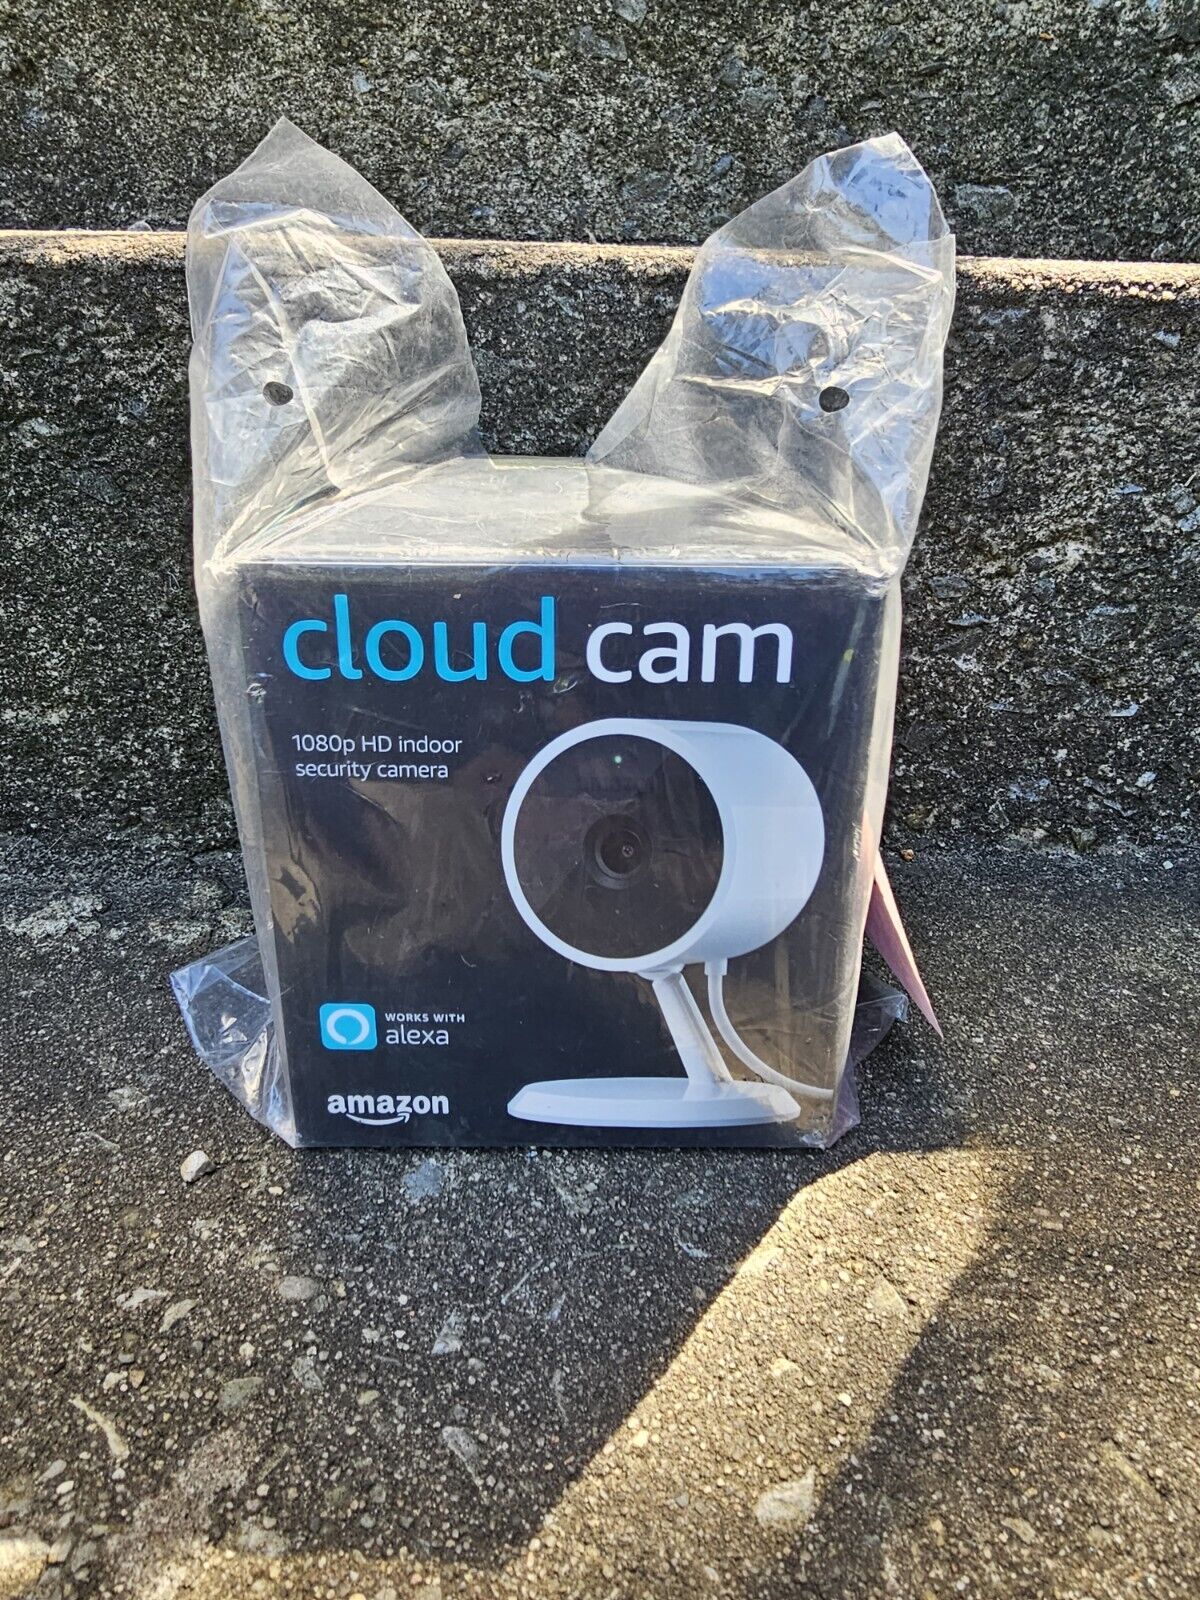 NEW (sealed) Amazon Cloud Cam 1080p HD Indoor Security Camera (BLANK TAB)